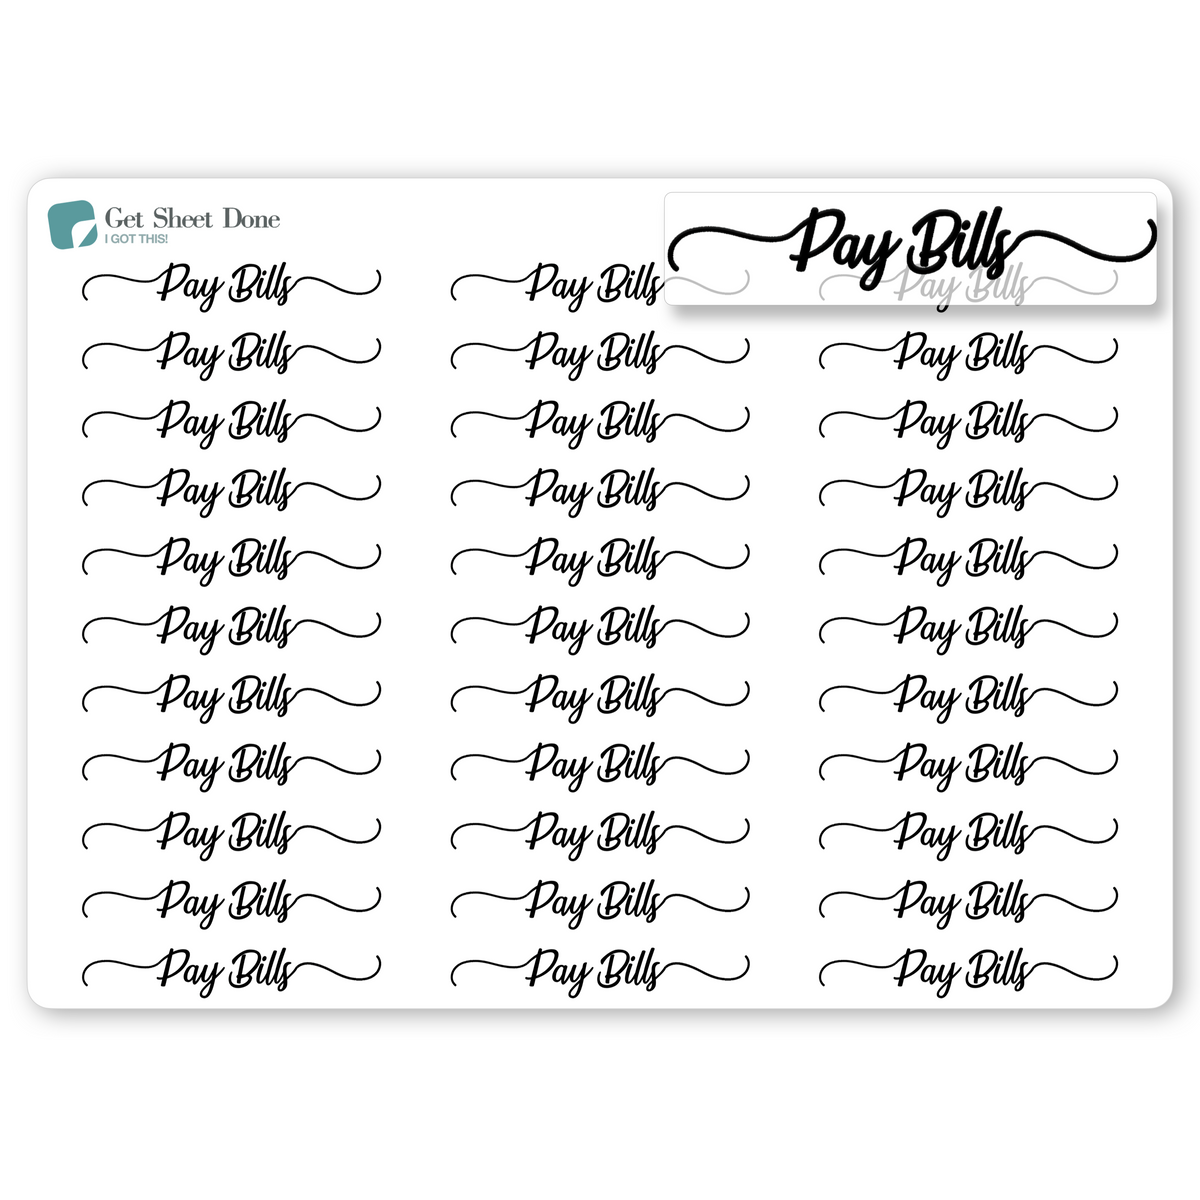 Pay Bills Foiled Script Planner Stickers / Chore Reminder Stickers / Script Text  / Bills & Budget Stickers / Bullet Journaling / Bujo / Essential Productivity Stickers